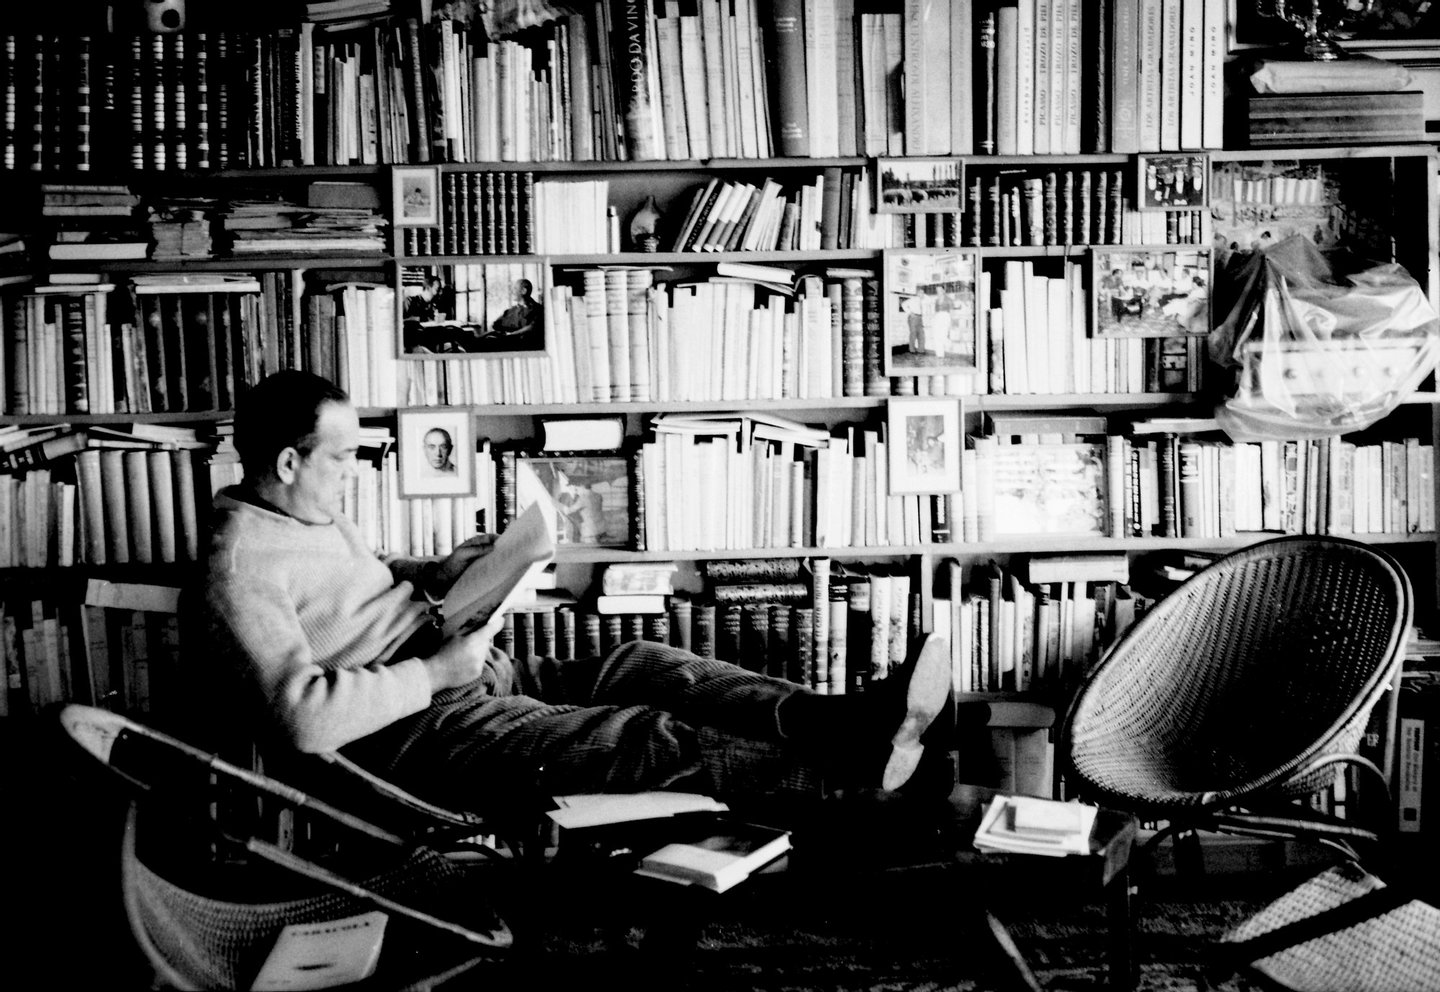 The Spanish writer Camilo Jose Cela, Nobel Prize for Literature in 1989, at his home in Palma de Mallorca, 15th December 1961, Balearic Islands, Spain. (Photo by Gianni Ferrari/Cover/Getty Images)